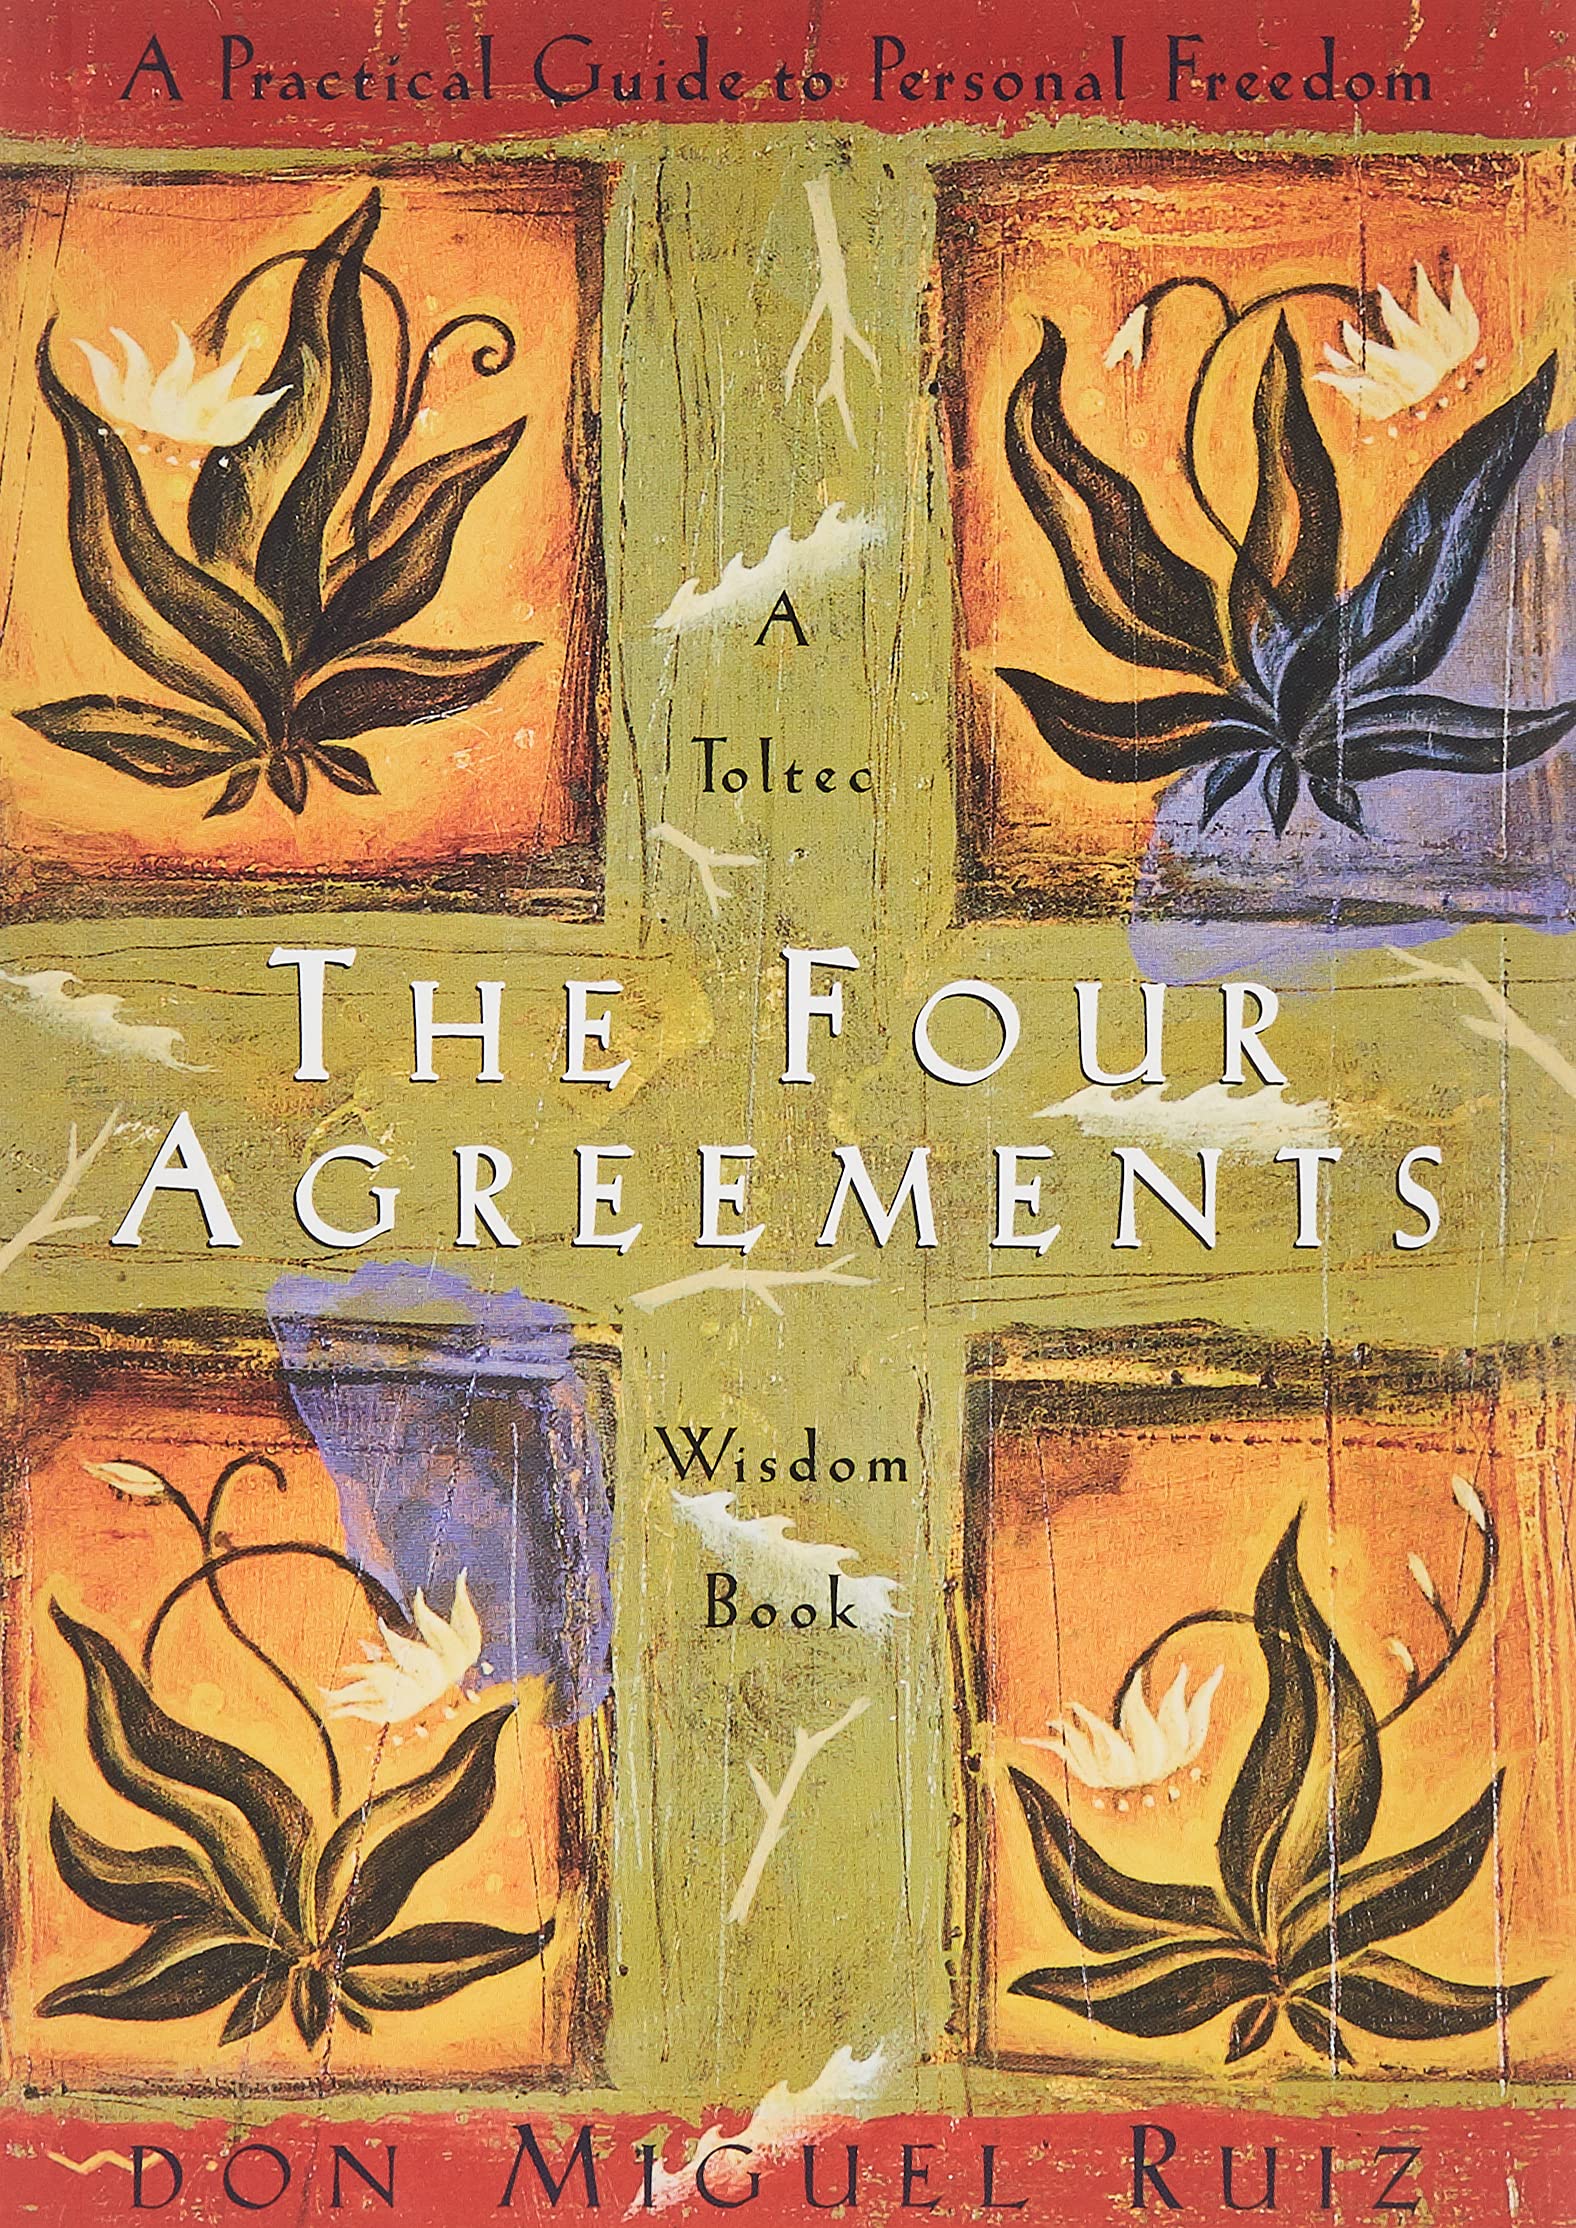 Livre ISBN 1878424319 The Four Agreements: A Practical Guide to Personal Freedom (Don Miguel Ruiz)